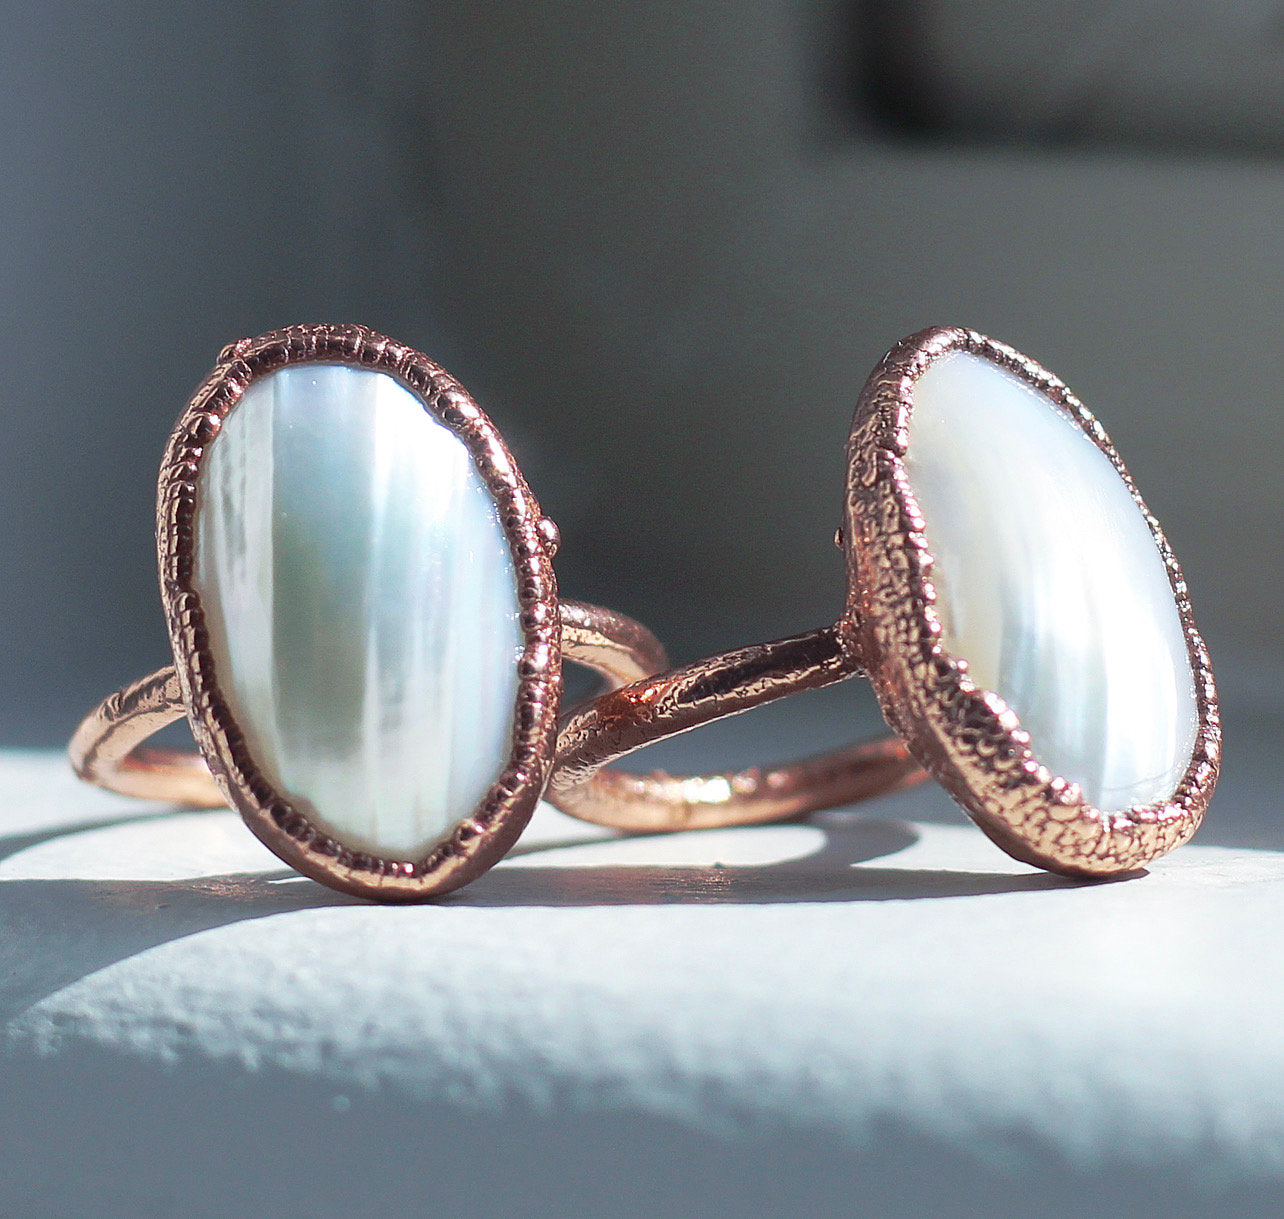 Big Pearl Ring, Oval Pearl Ring, Nautilus Shell Ring, Osmena Shell Ring, Nautilus Shell Jewelry, Seashell Ring, Ocean Inspired Jewelry